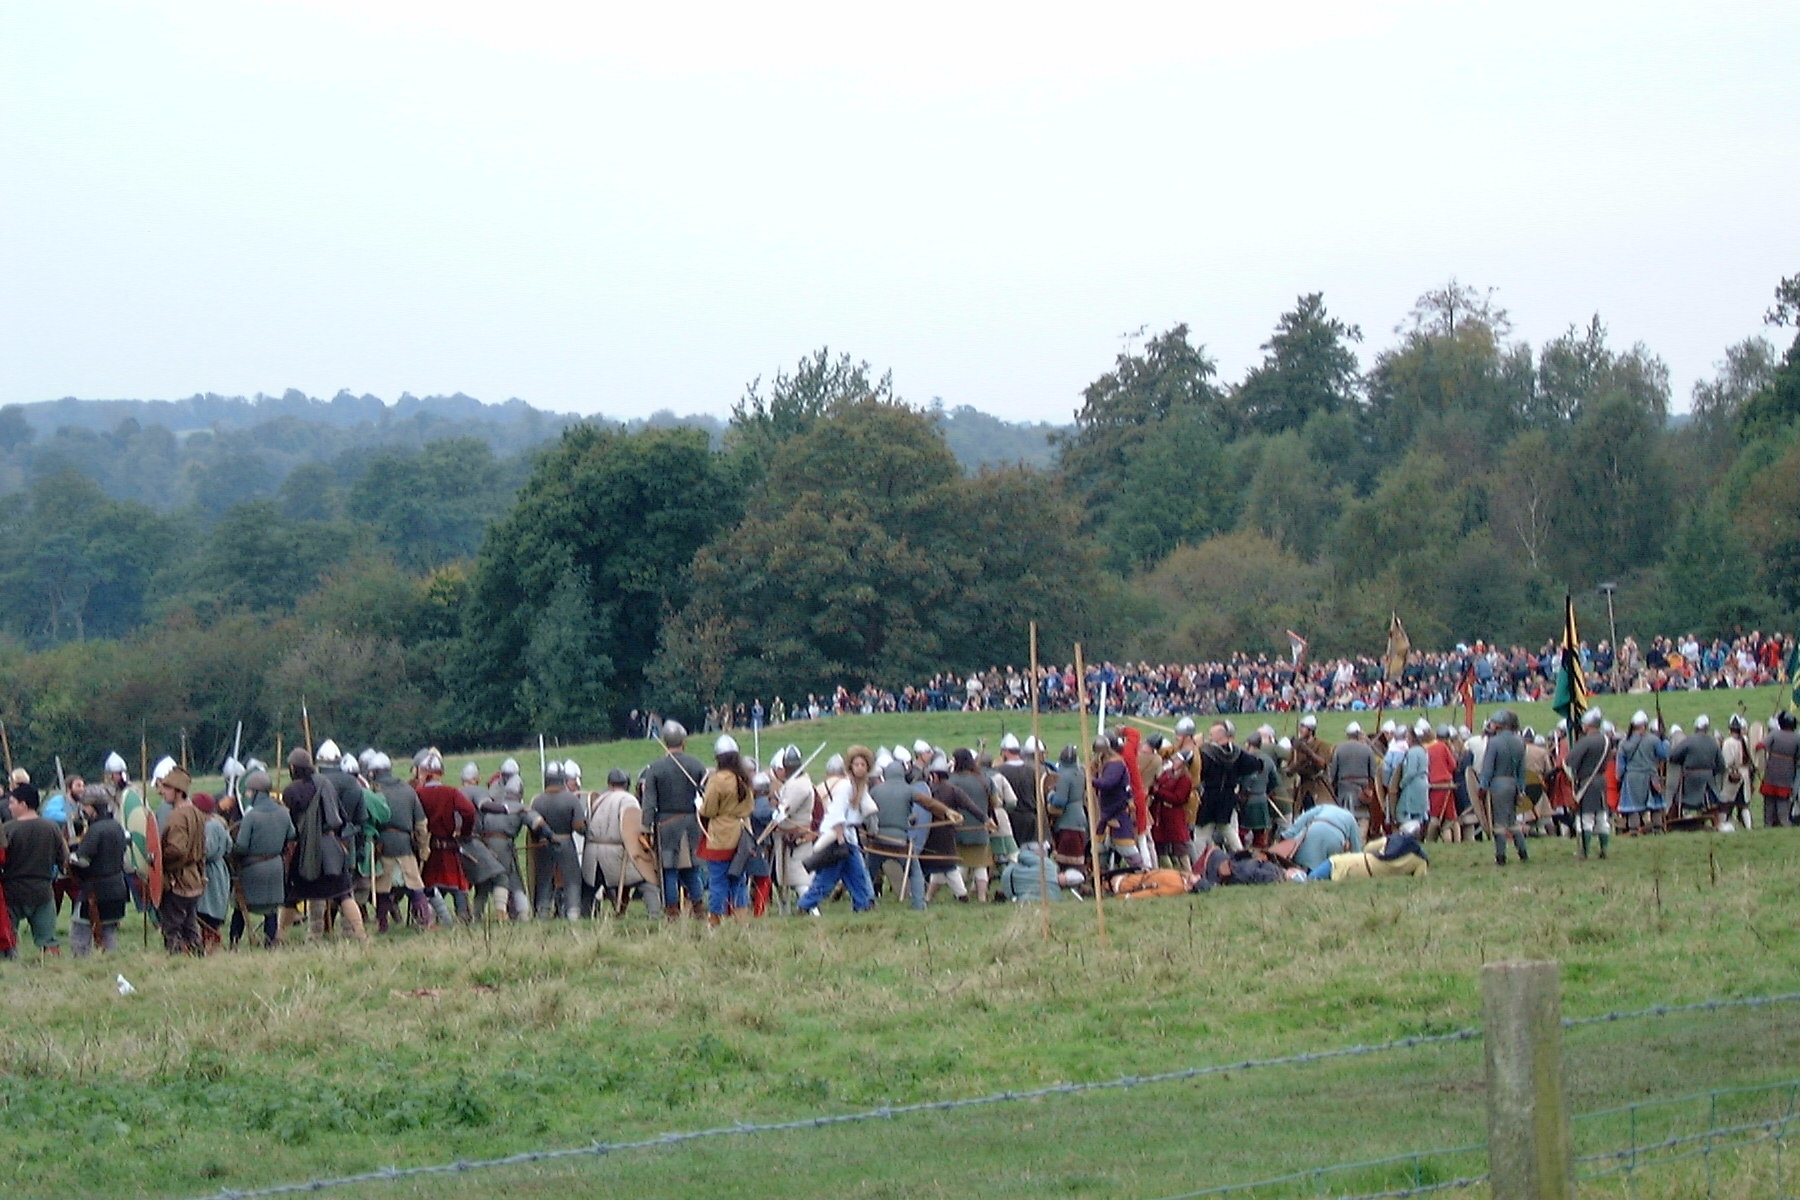 HASTINGS SAXON RIGHT AND AUDIENCE.jpg